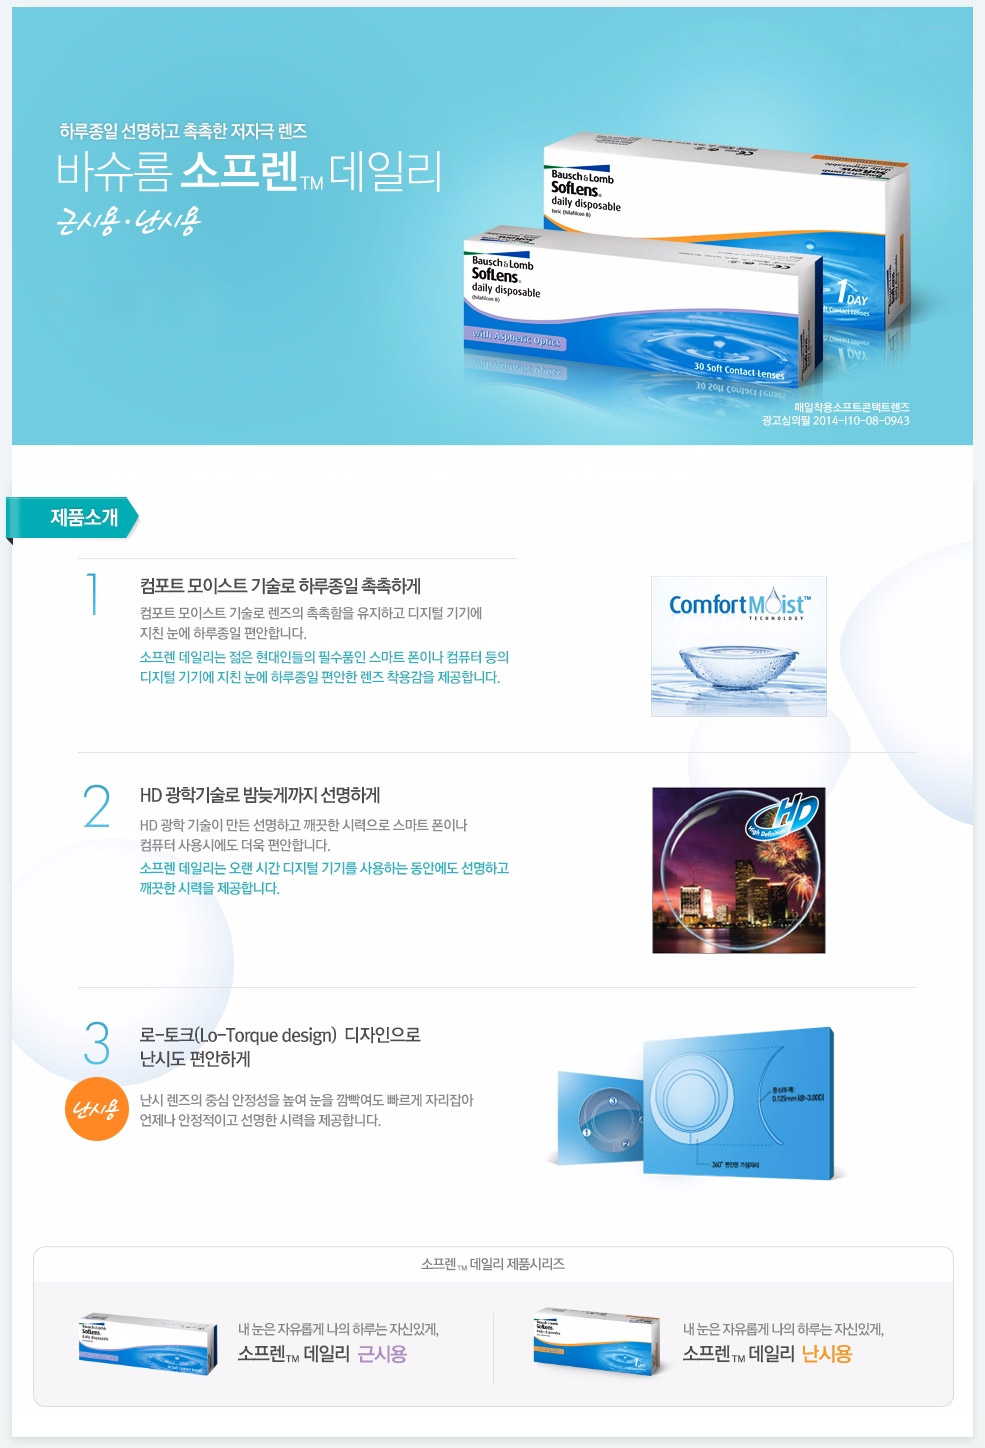 Sixth description images of Bausch & Lomb 1-day Soflens Clear Contact Lenses (90pcs)